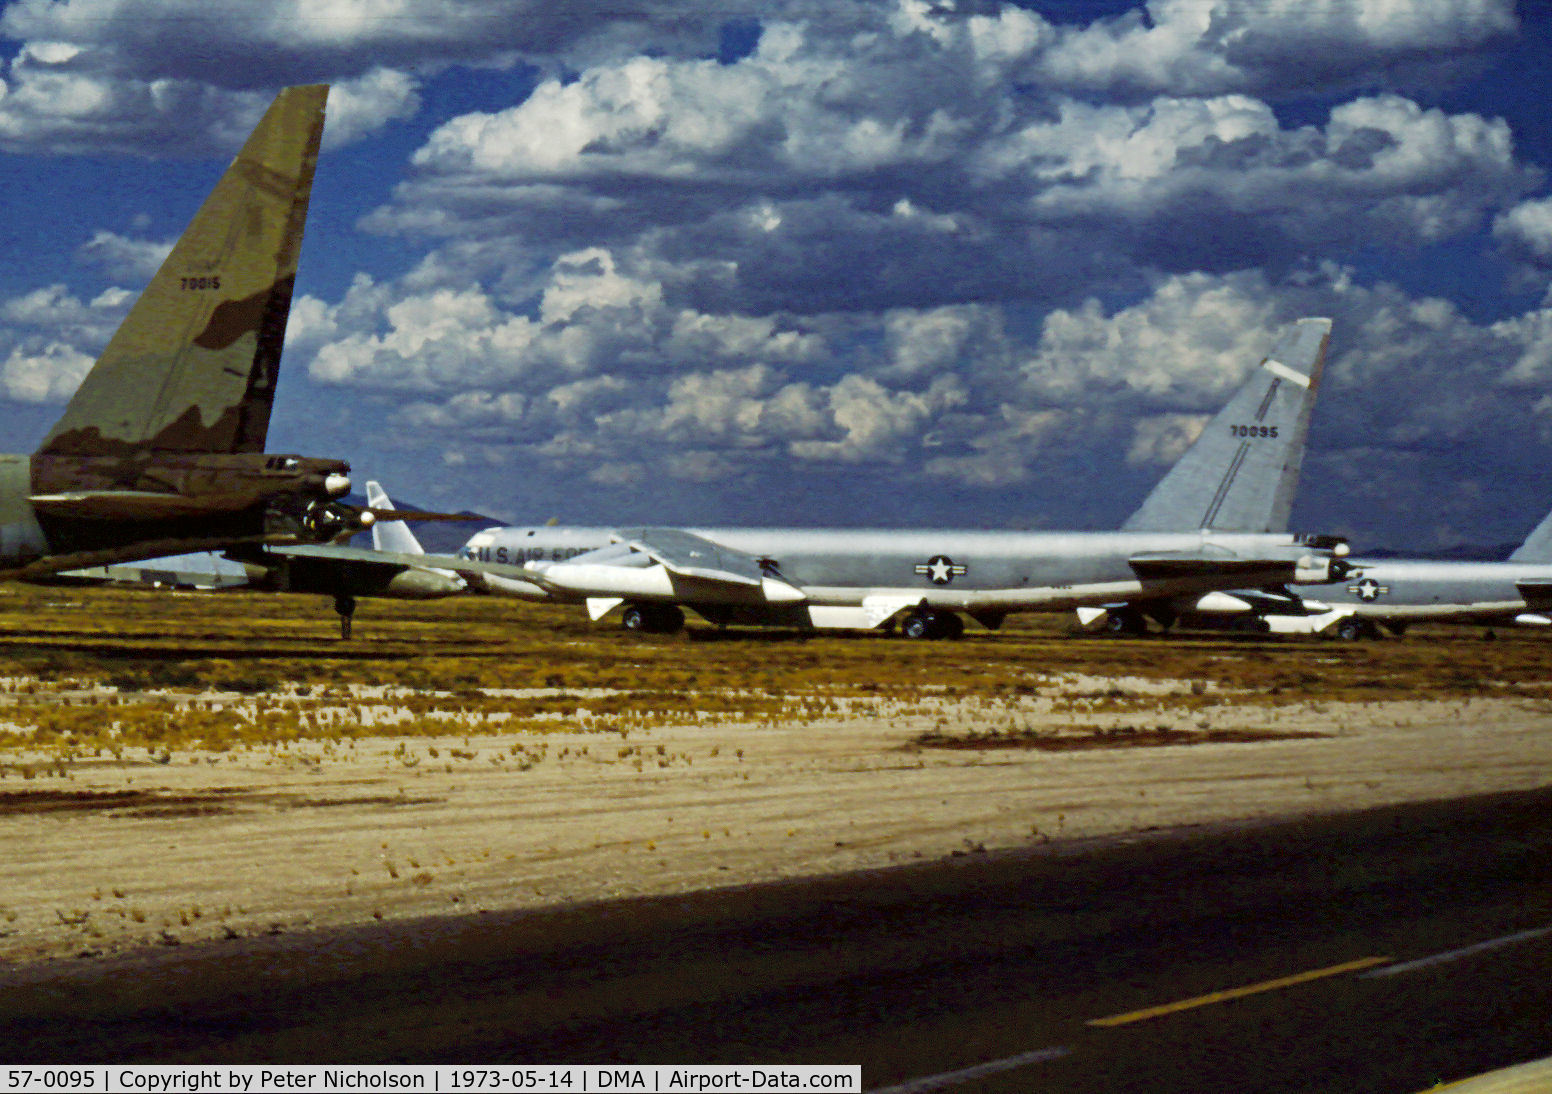 57-0095, 1957 Boeing B-52E Stratofortress C/N 464084, B-52E Stratofortress of 96th Strategic Wing in storage at what was then known as the Military Aircraft Storage & Disposition Centre - MASDC - in May 1973.